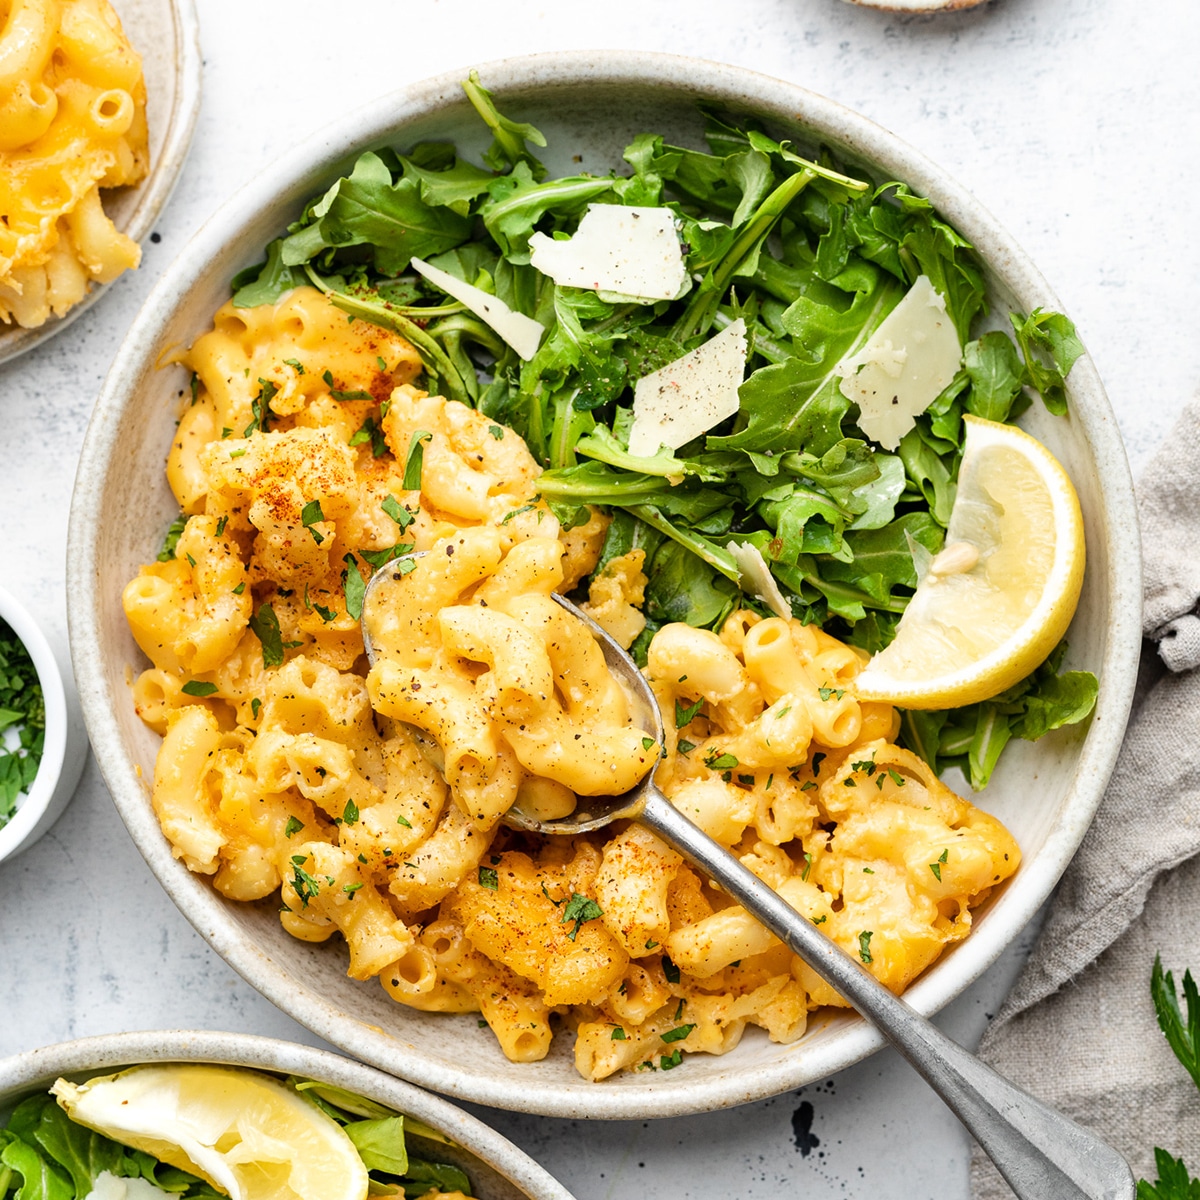 Mac and cheese in a white bowl with arugula salad.